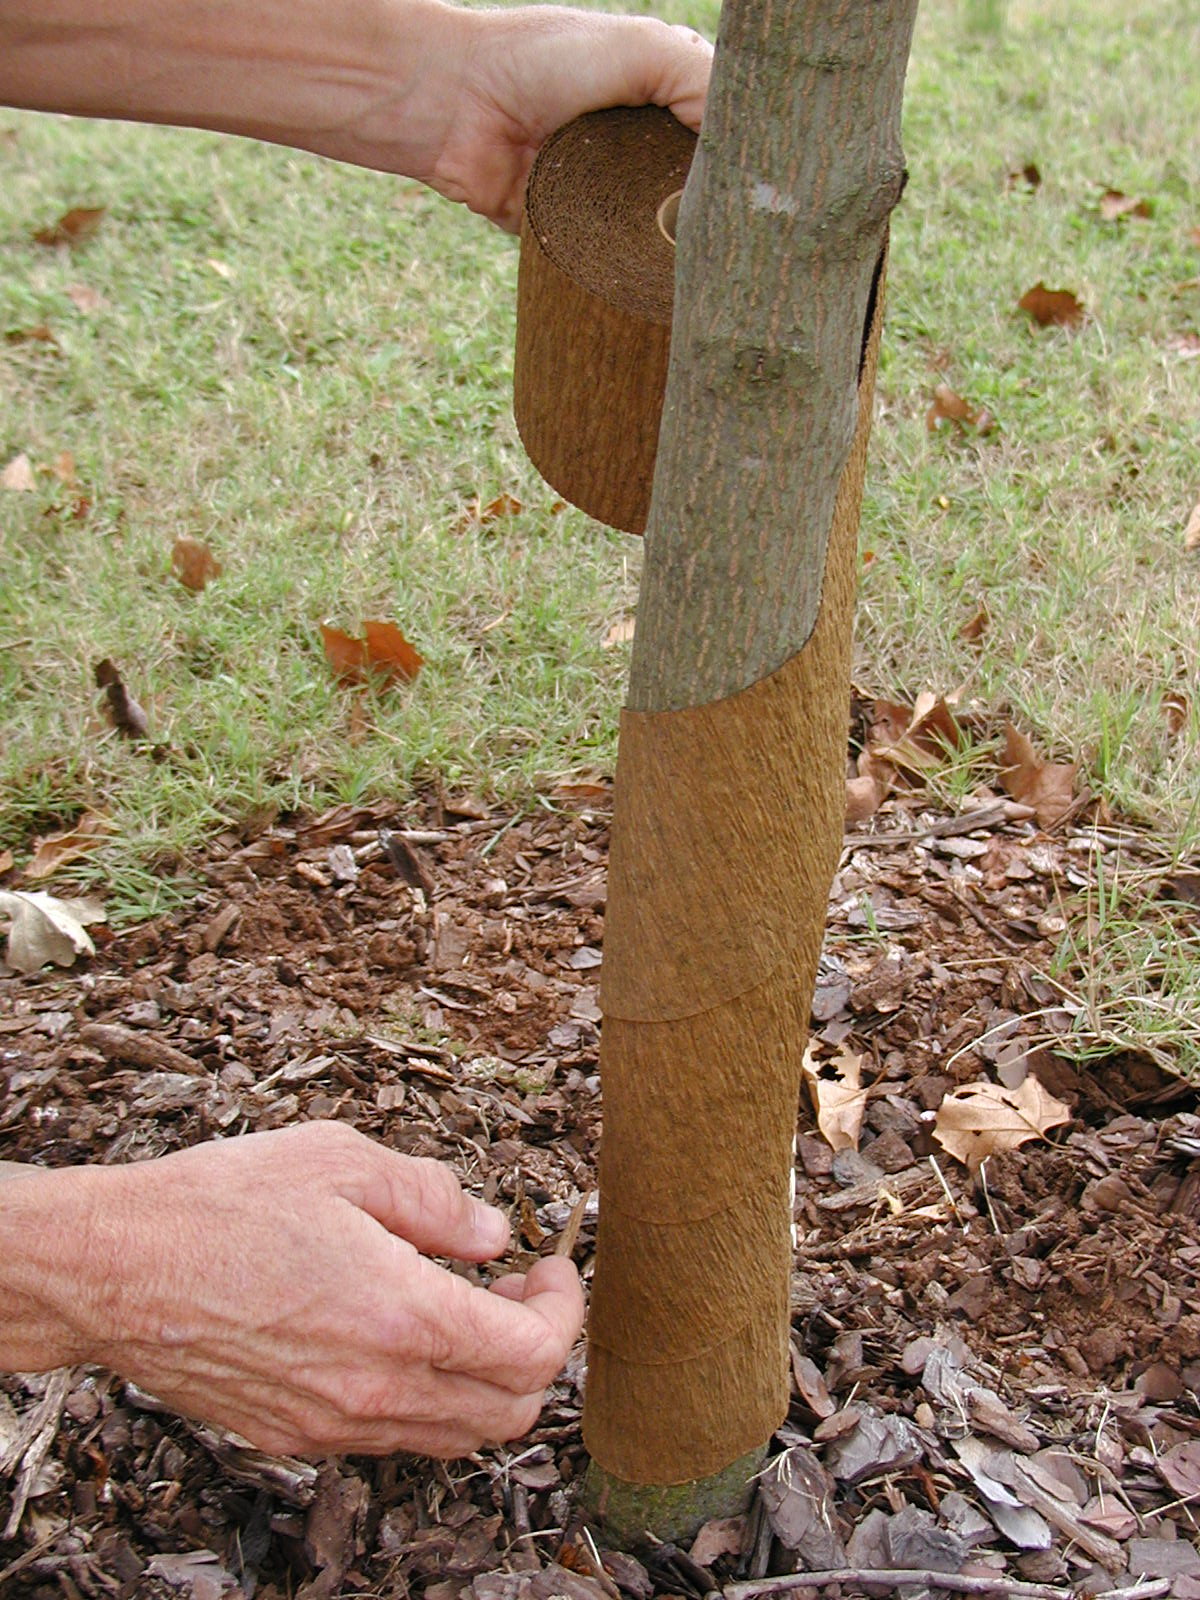 A man applying paper wraps to the base of a tree.